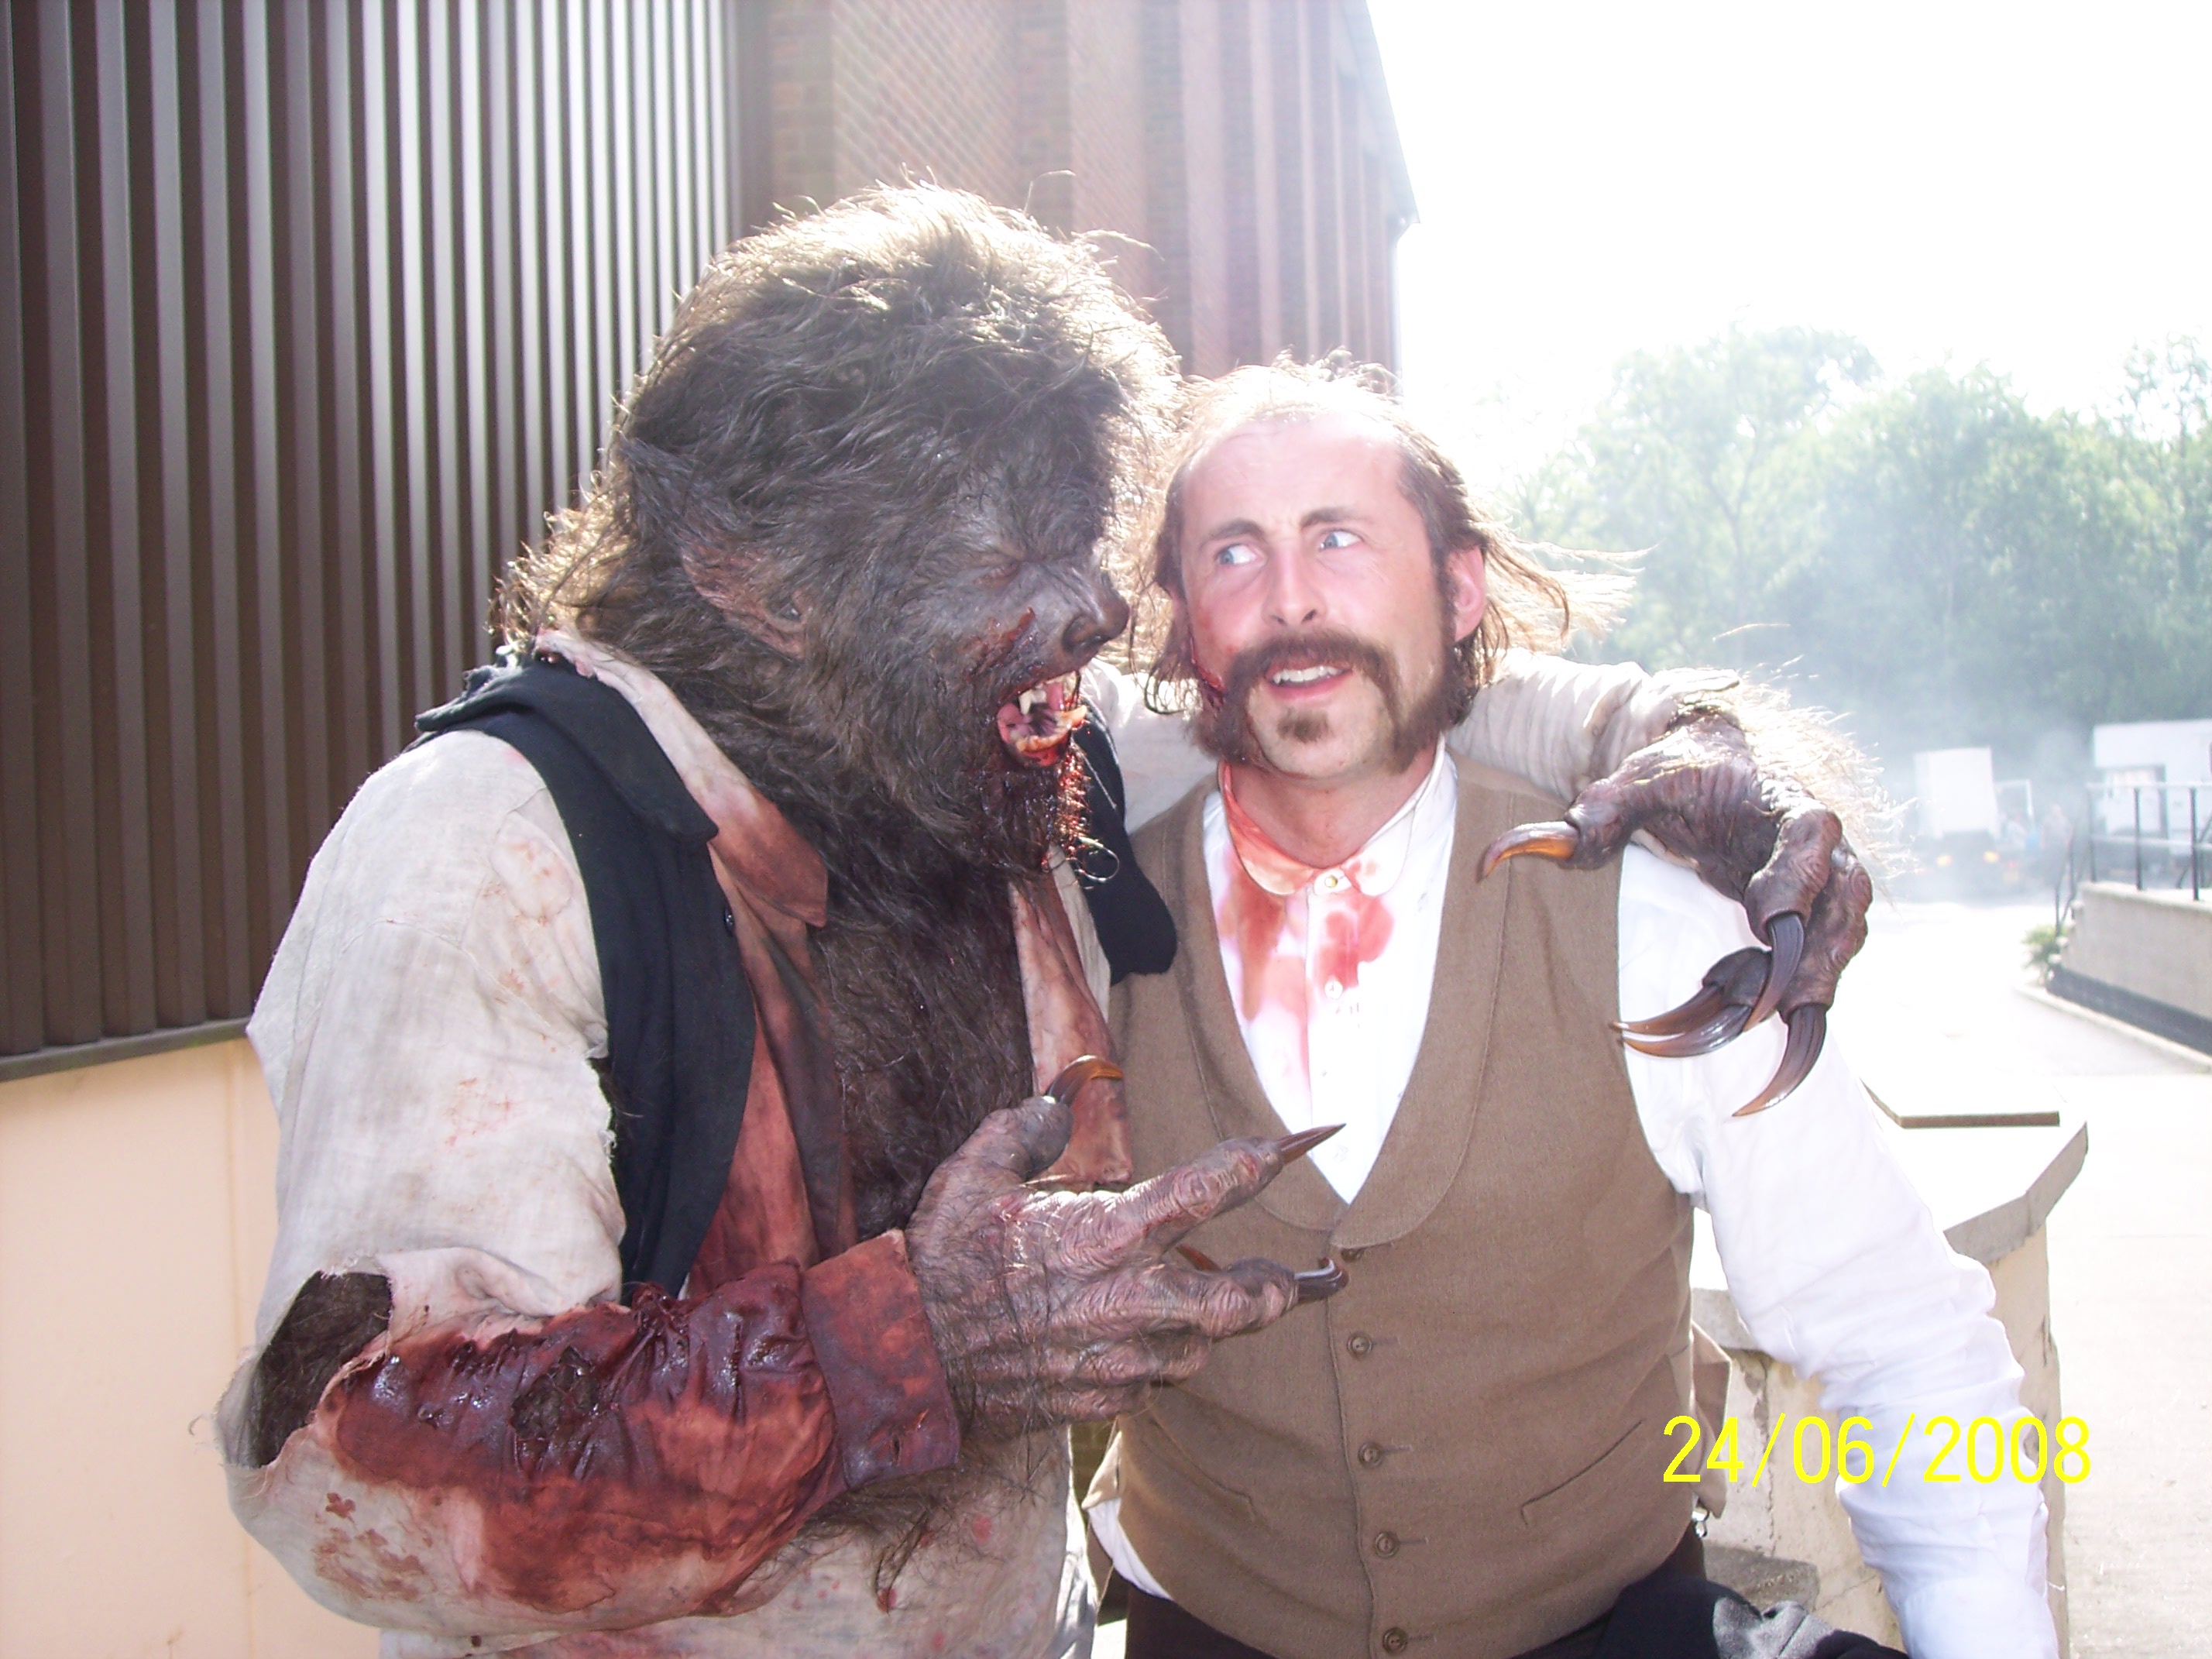 Curtis Rivers fooling around with 'The Wolfman' outside J Stage, Pinewood Studios, 2008.